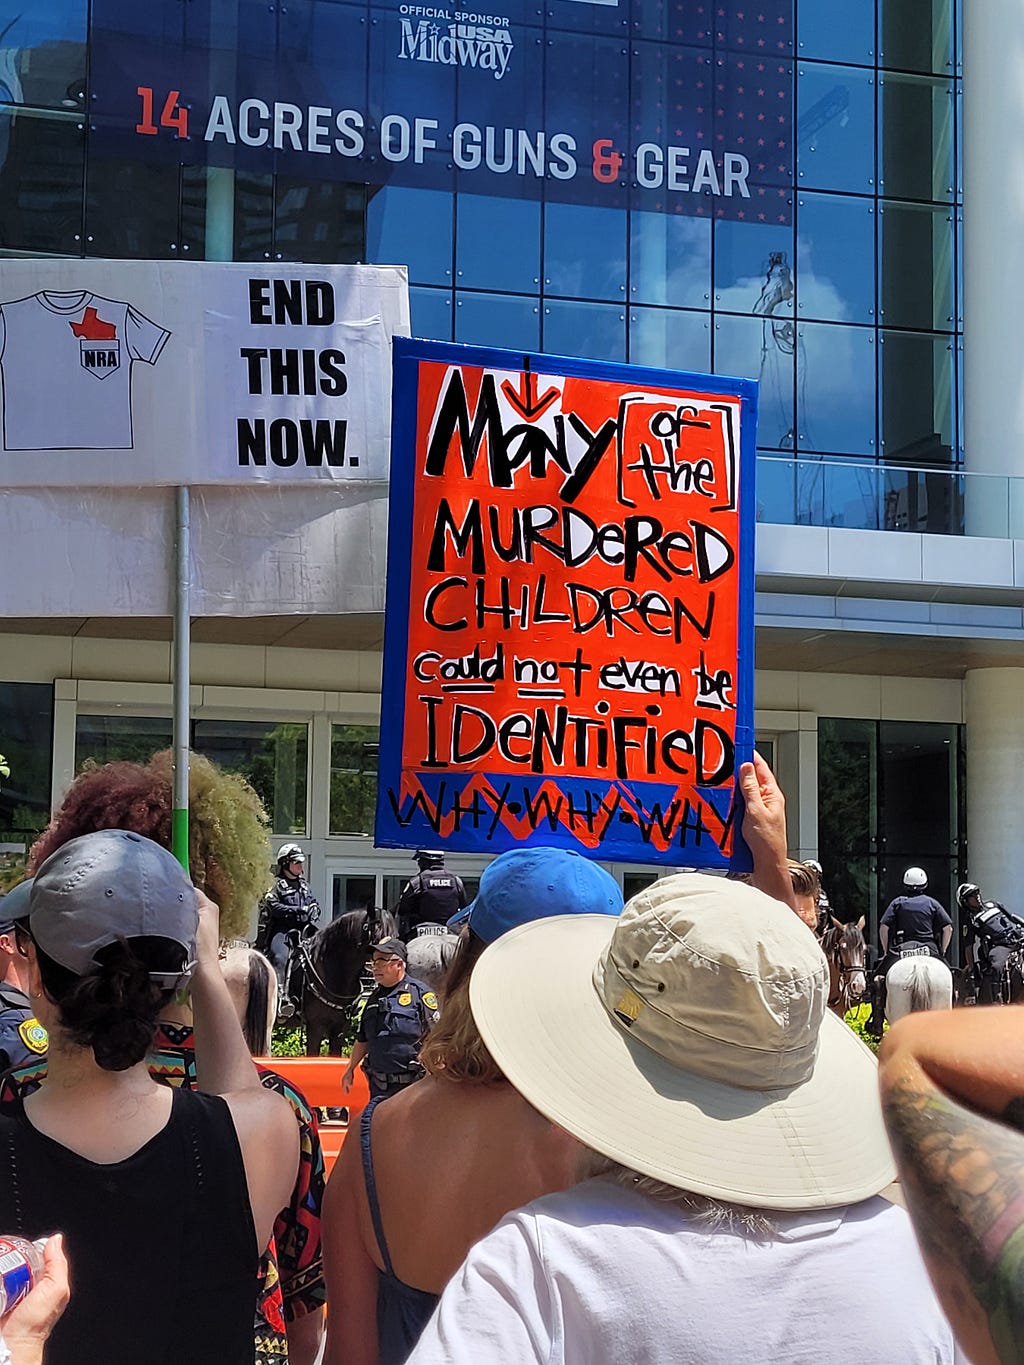 Anti gun violence activists protest outside an NRA convention in Houston and raise signs reading “End This Now” and “Many of the Murdered Children could not even be Identified.”